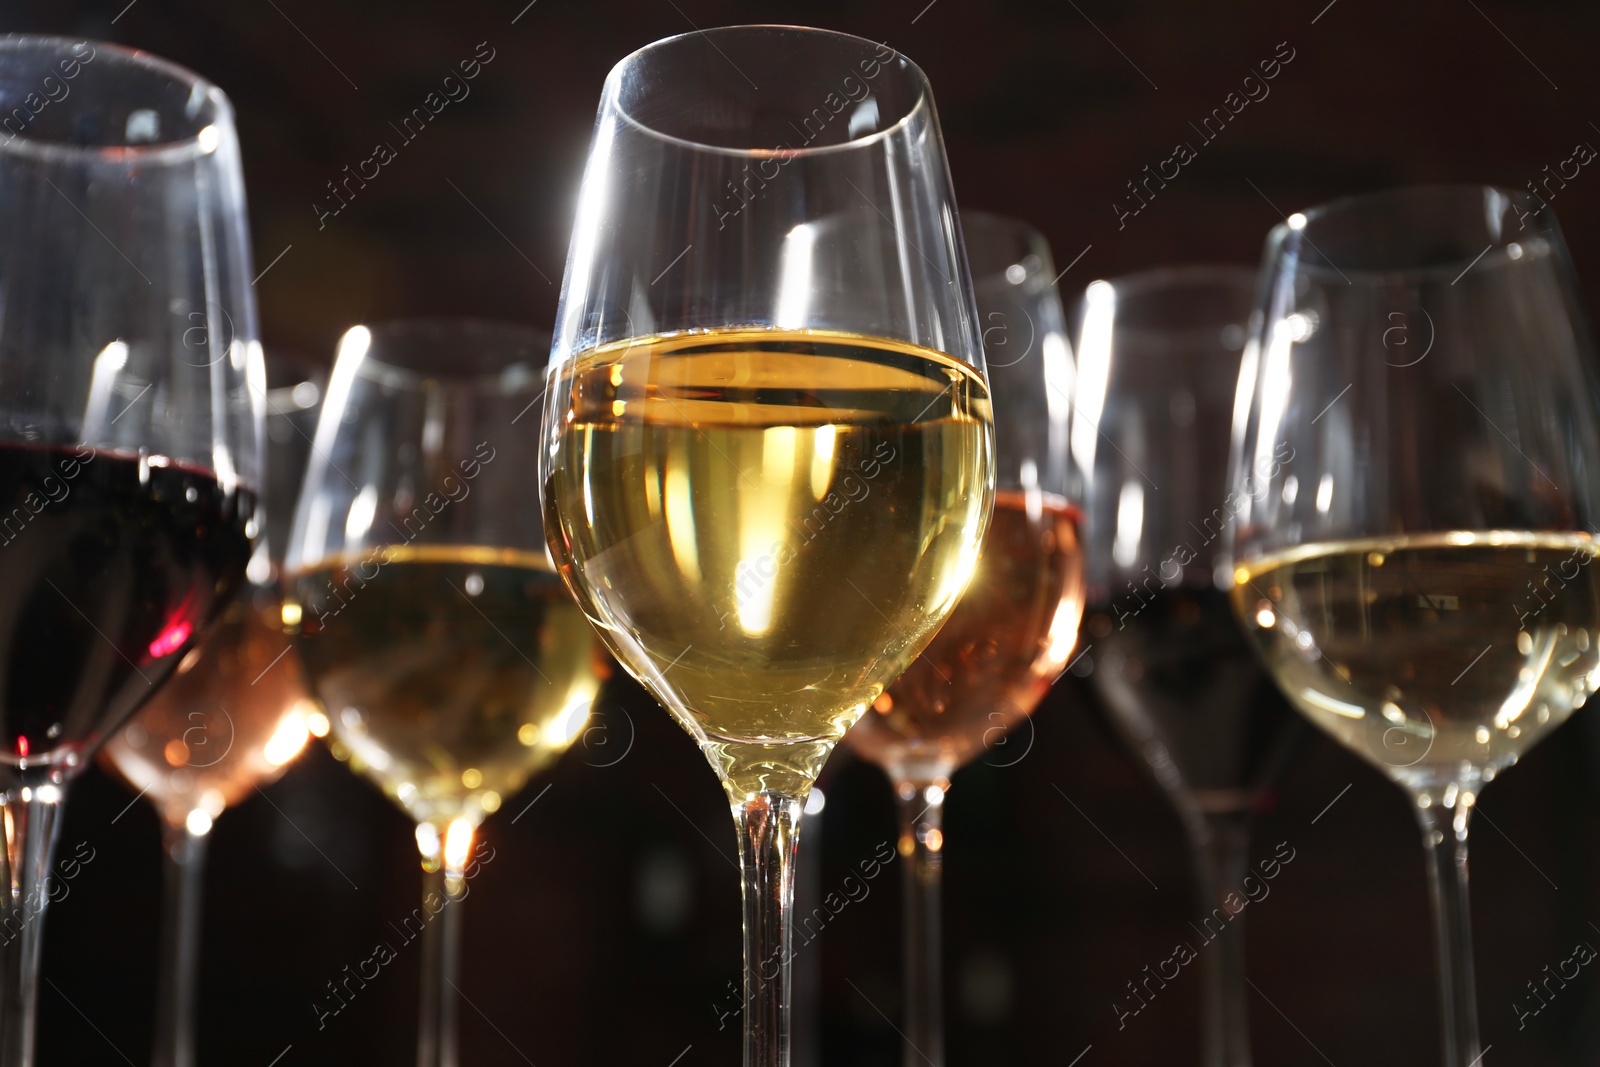 Photo of Different tasty wines in glasses against blurred background, low angle view